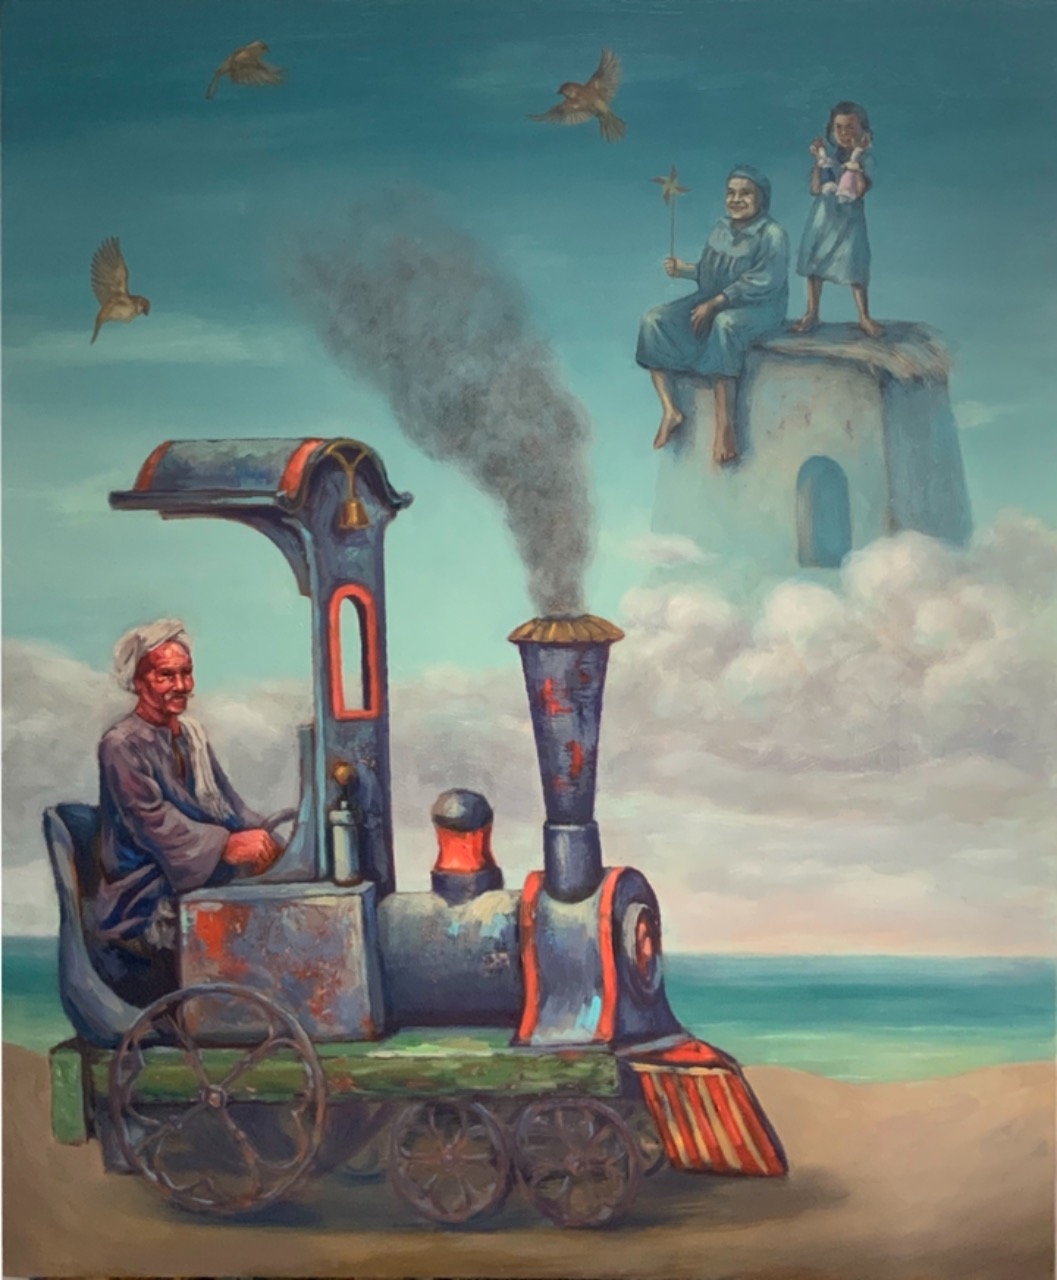 Mohamed Elbehairy (1993) The Train of Dreams , 2020 Signed & dated Oil on canvas 150x120cm (MB-124)